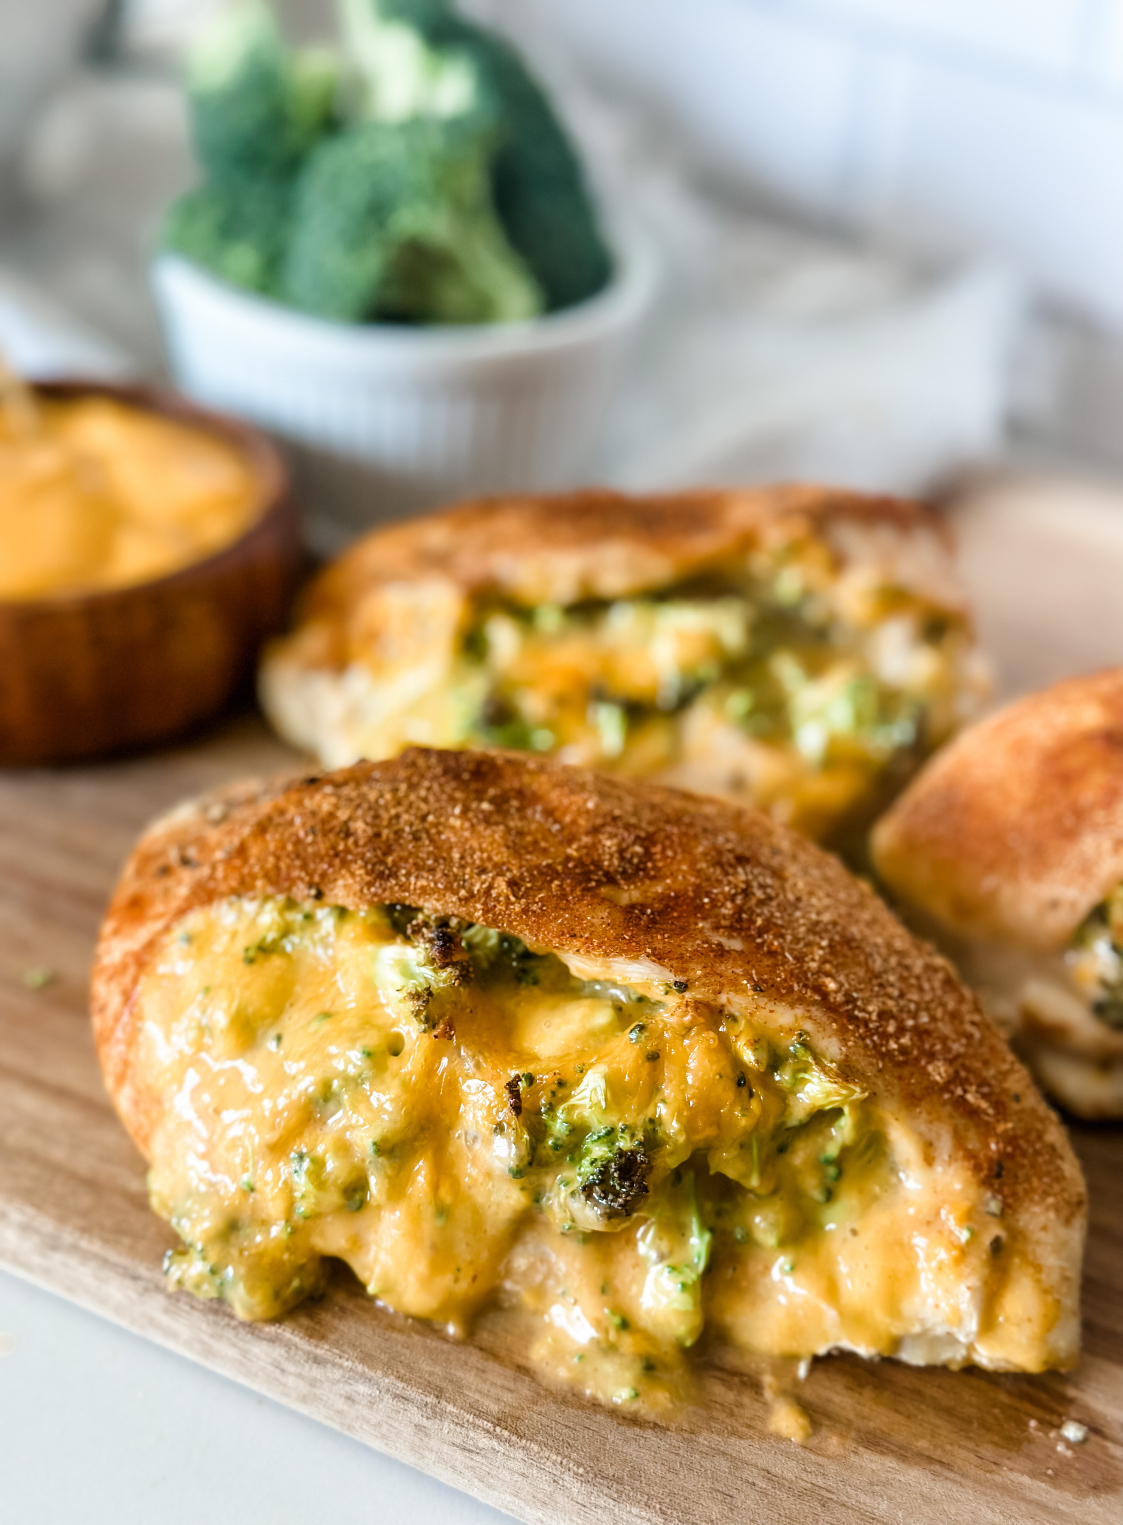 Broccoli and Cheese Stuffed Chicken - Measuring Cups, Optional